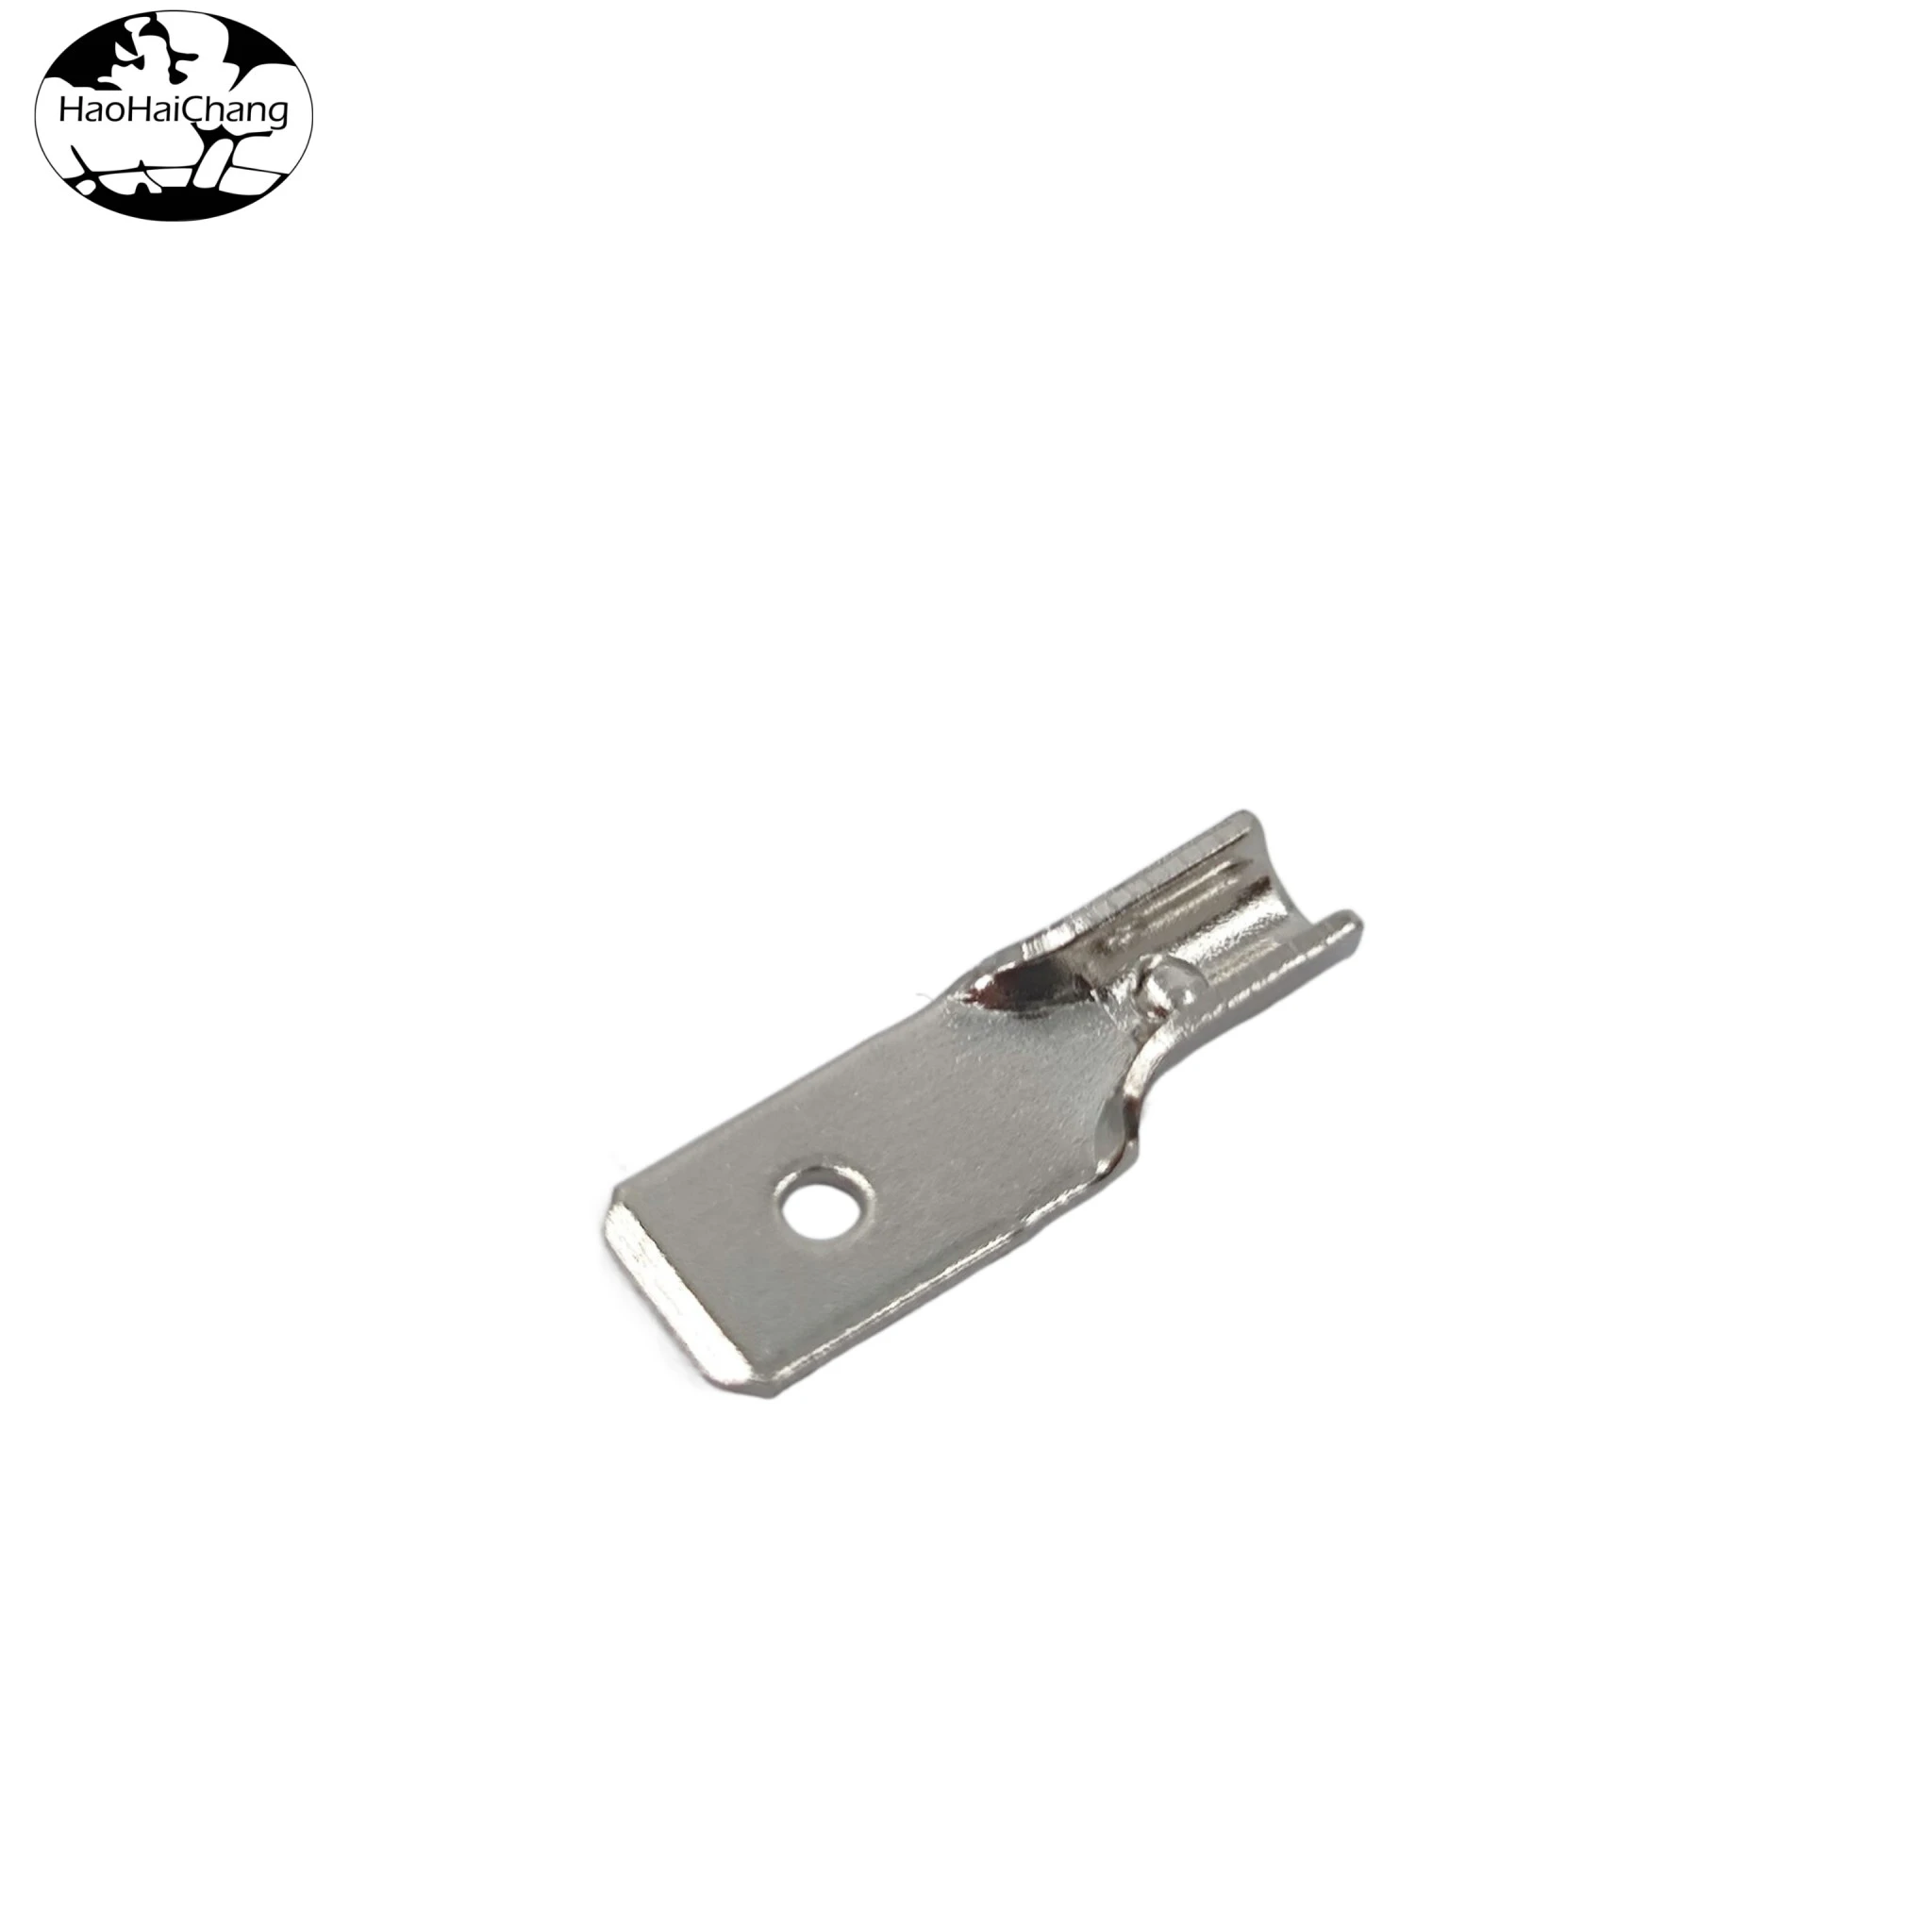 HHC-0216 Connector